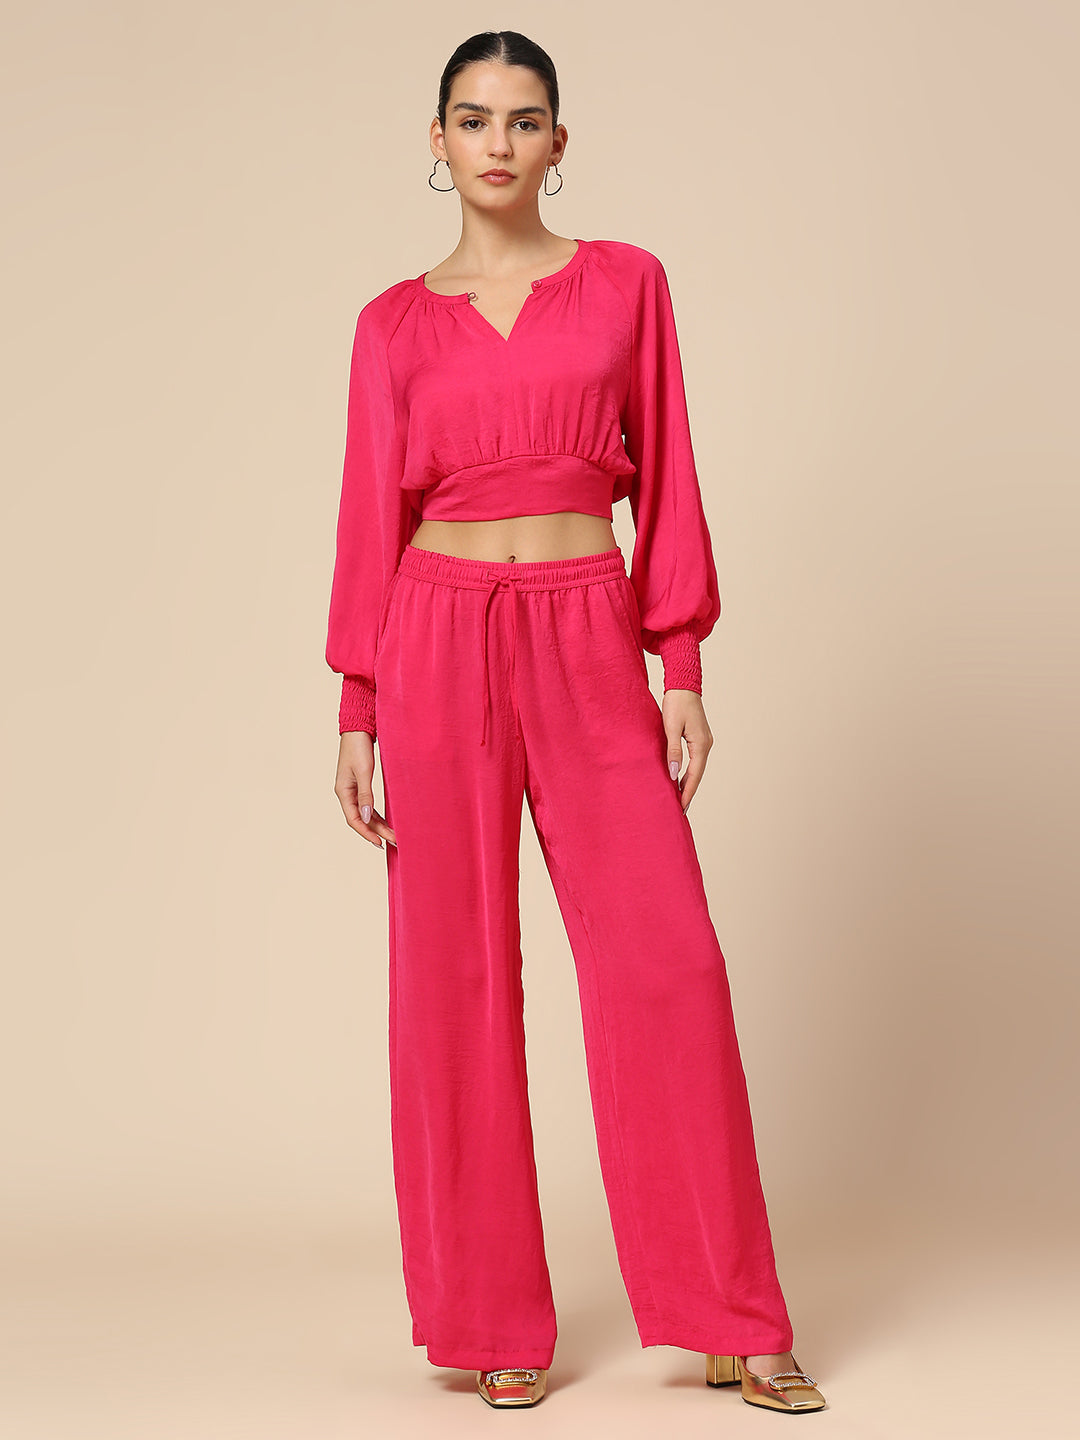 CRUSHED POLY CO-ORD SET WITH ROMANTIC SLEEVED CROP TOP & FLUID PULL ON PANTS